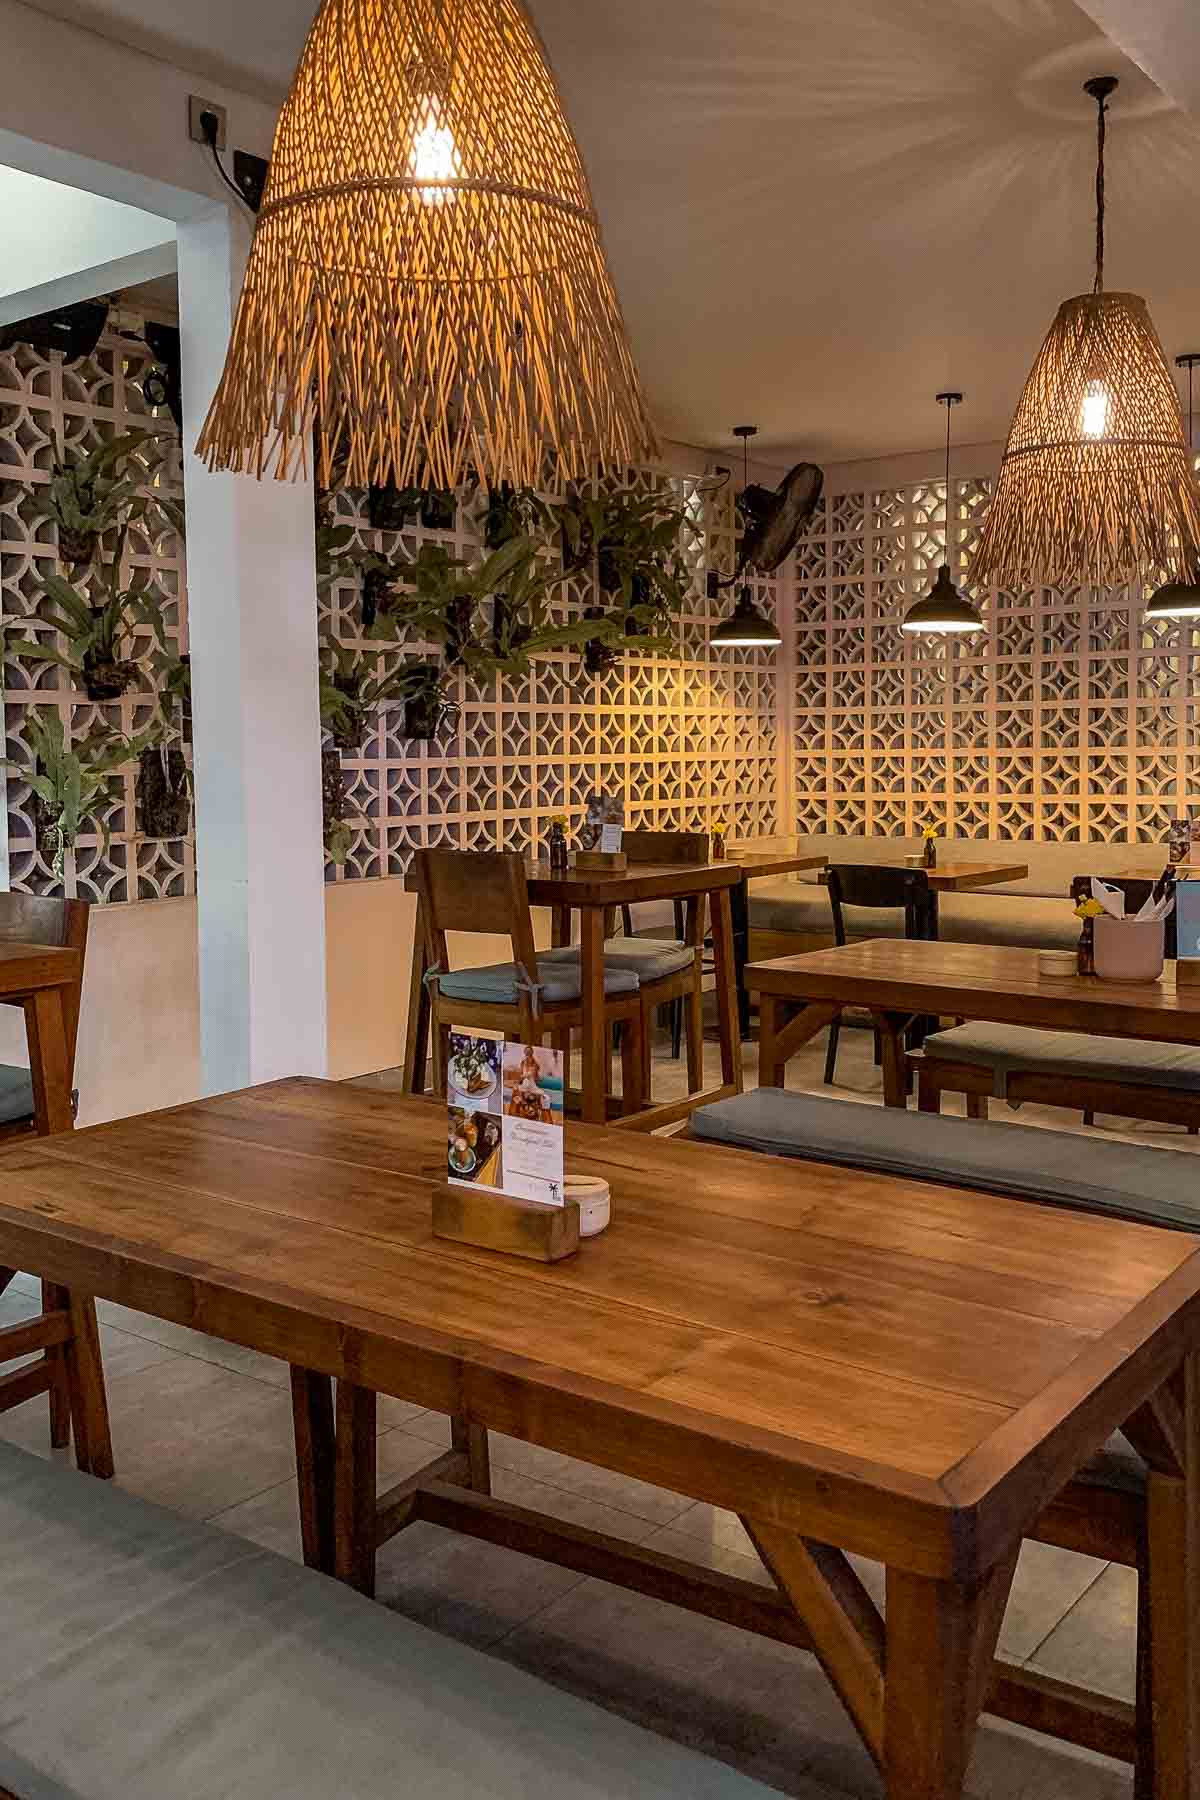 Inside eating area at Common Cafe in Canggu, Bali